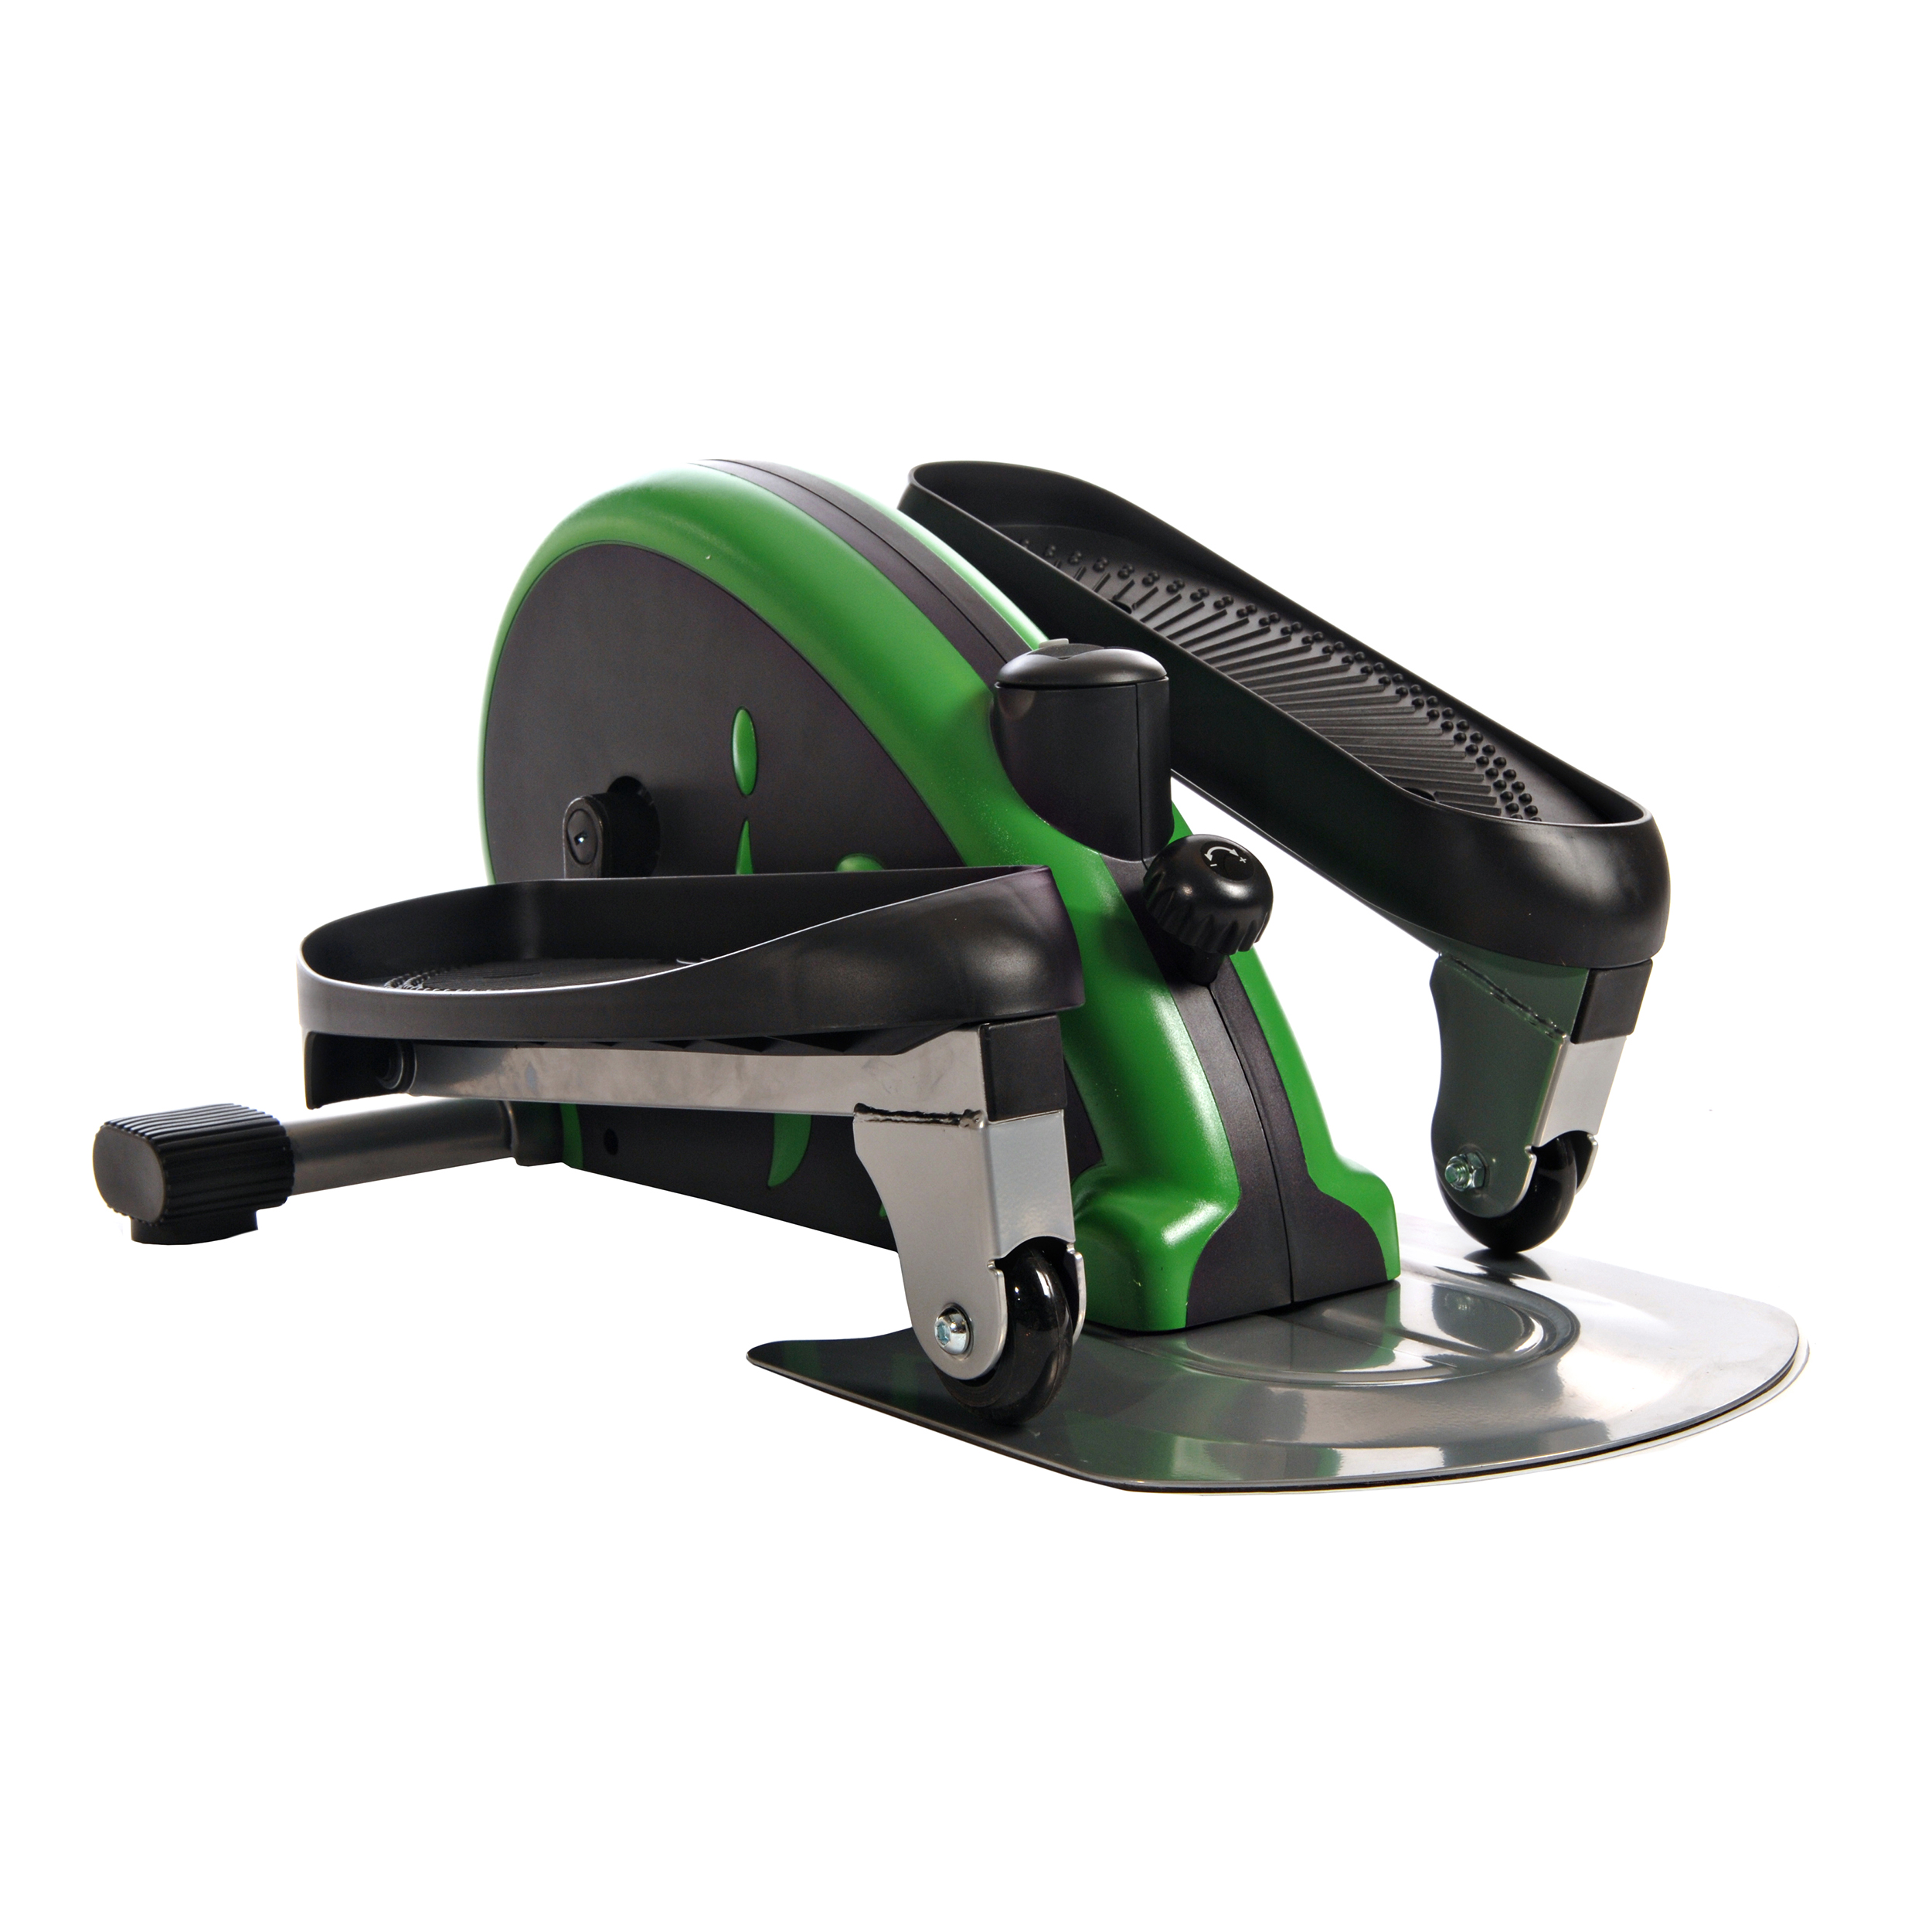 Stamina InMotion E-1000 Mini Elliptical Trainer, Adjustable Tension Resistance, 250 lb. Weight Limit, Green - image 1 of 5